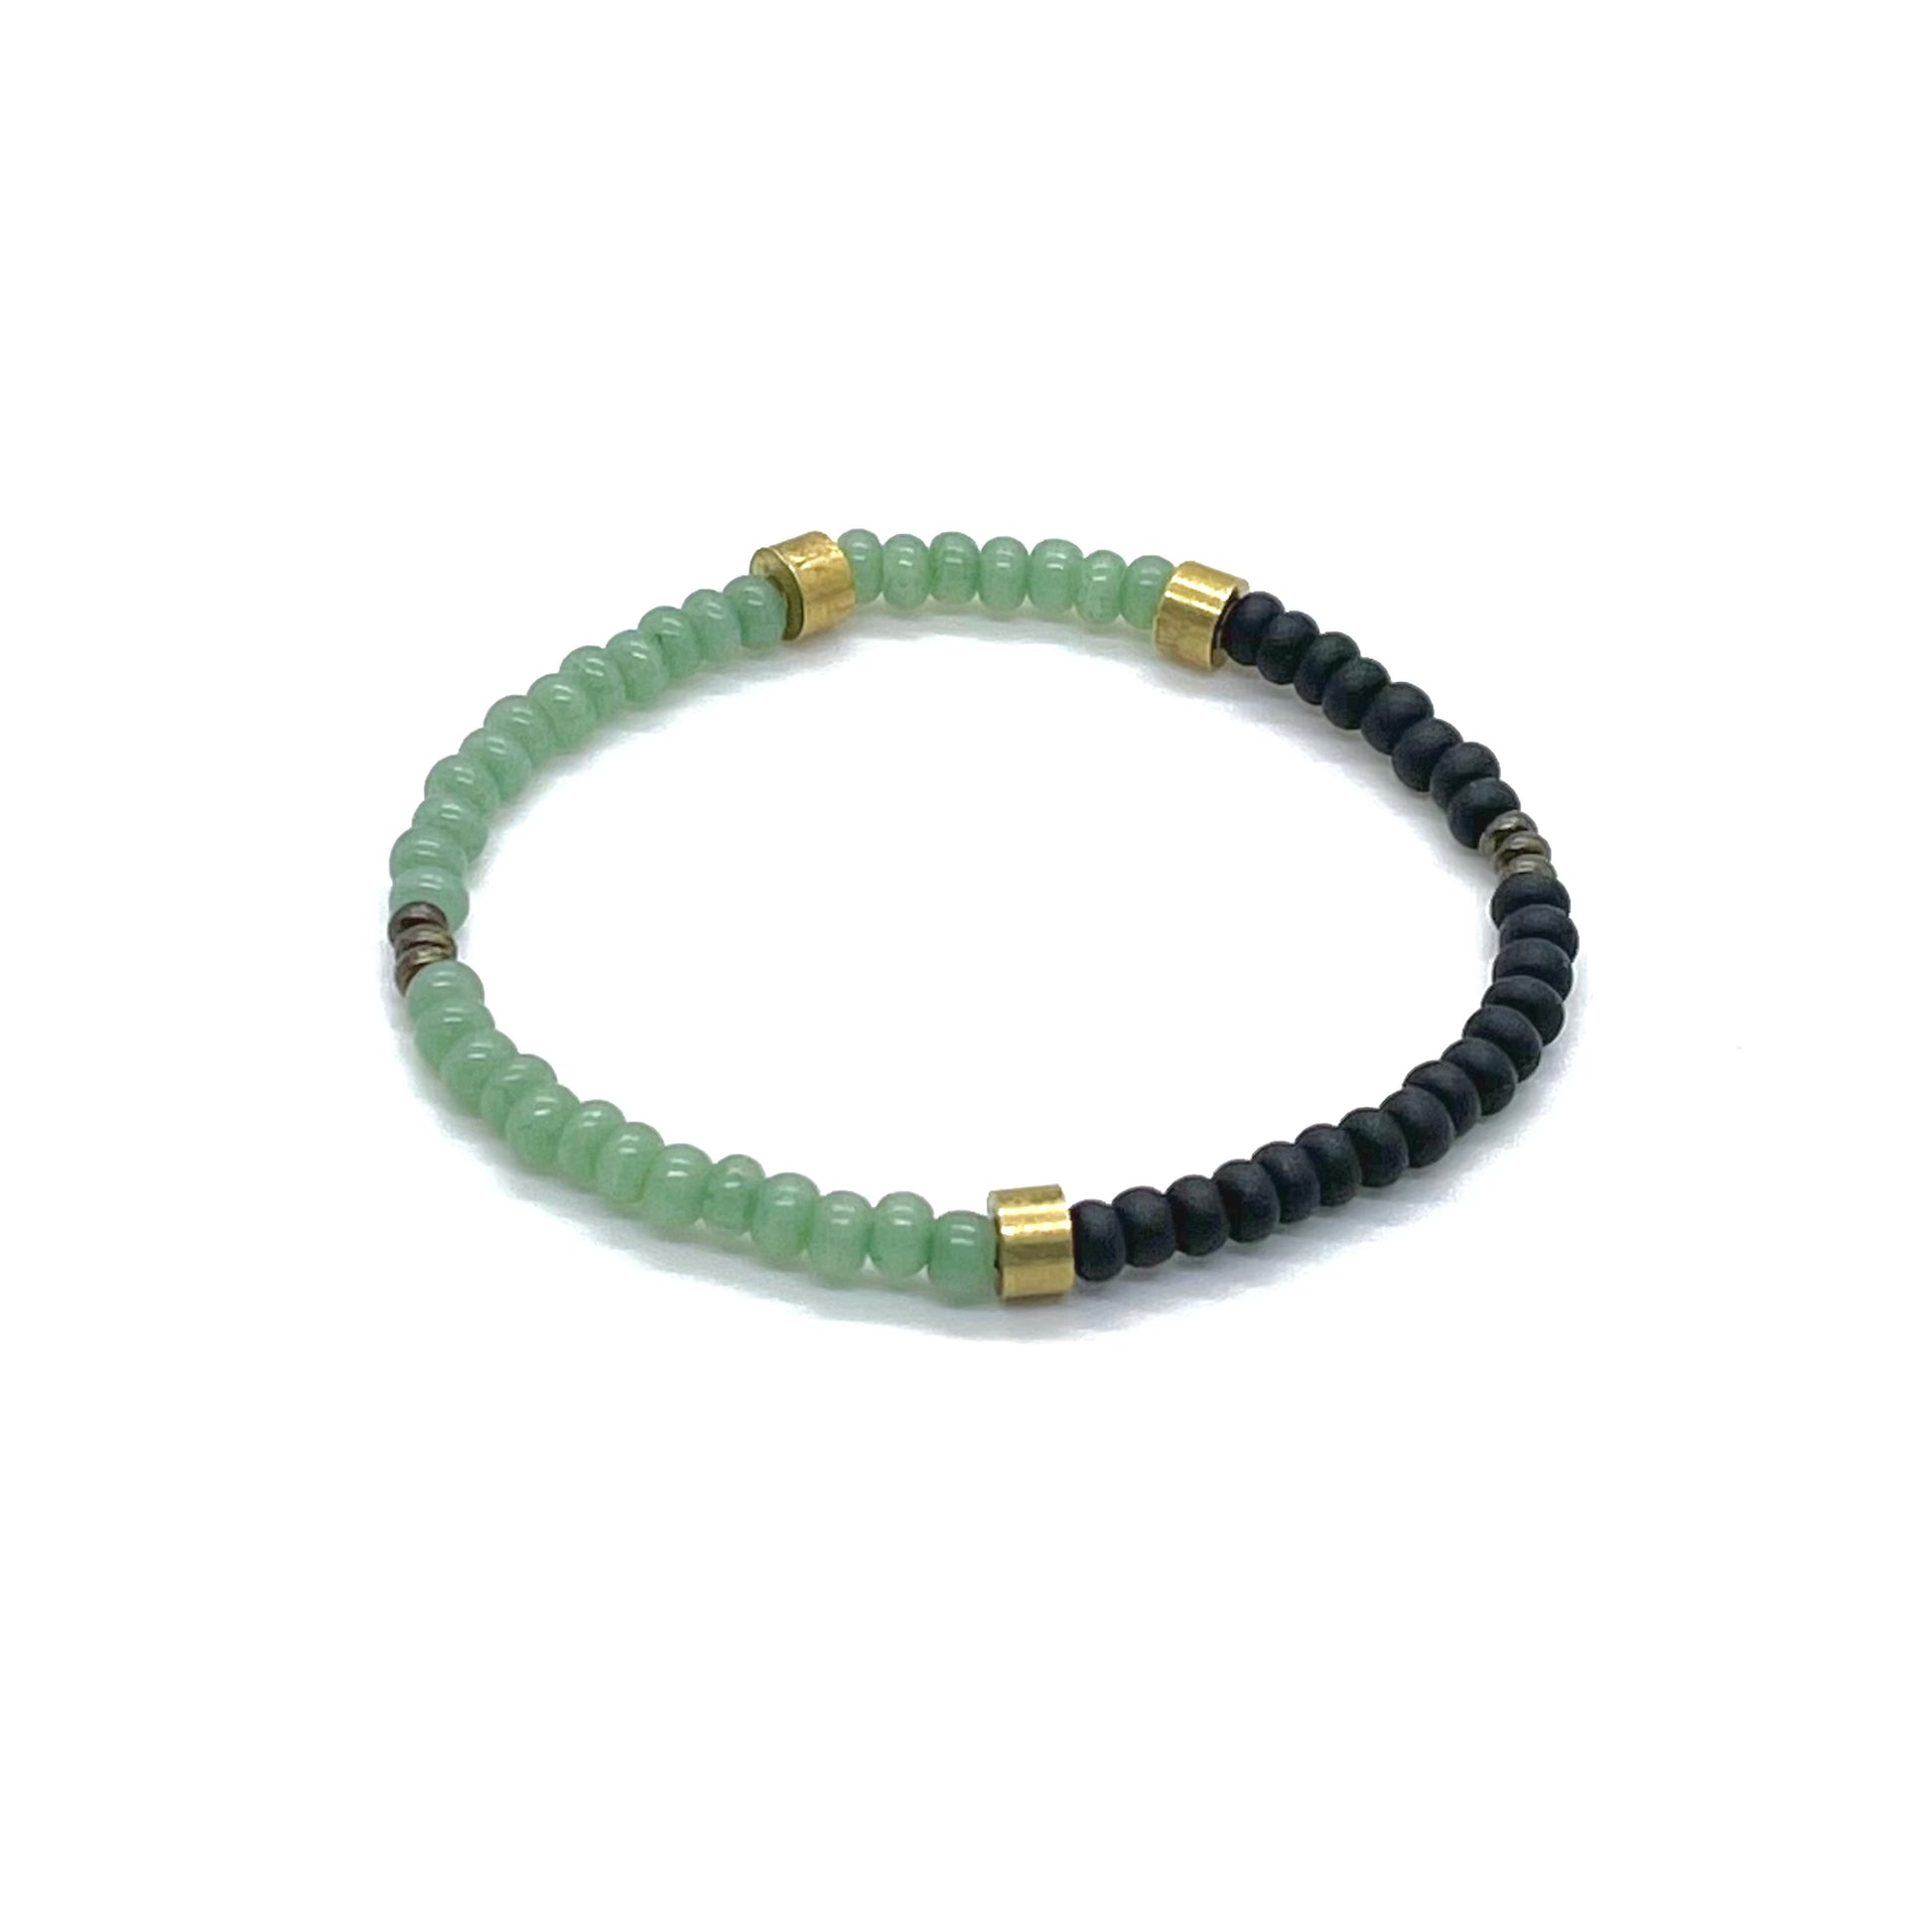 Men's green bracelet with green and black seed beads and raw brass beads on elastic stretch cord.